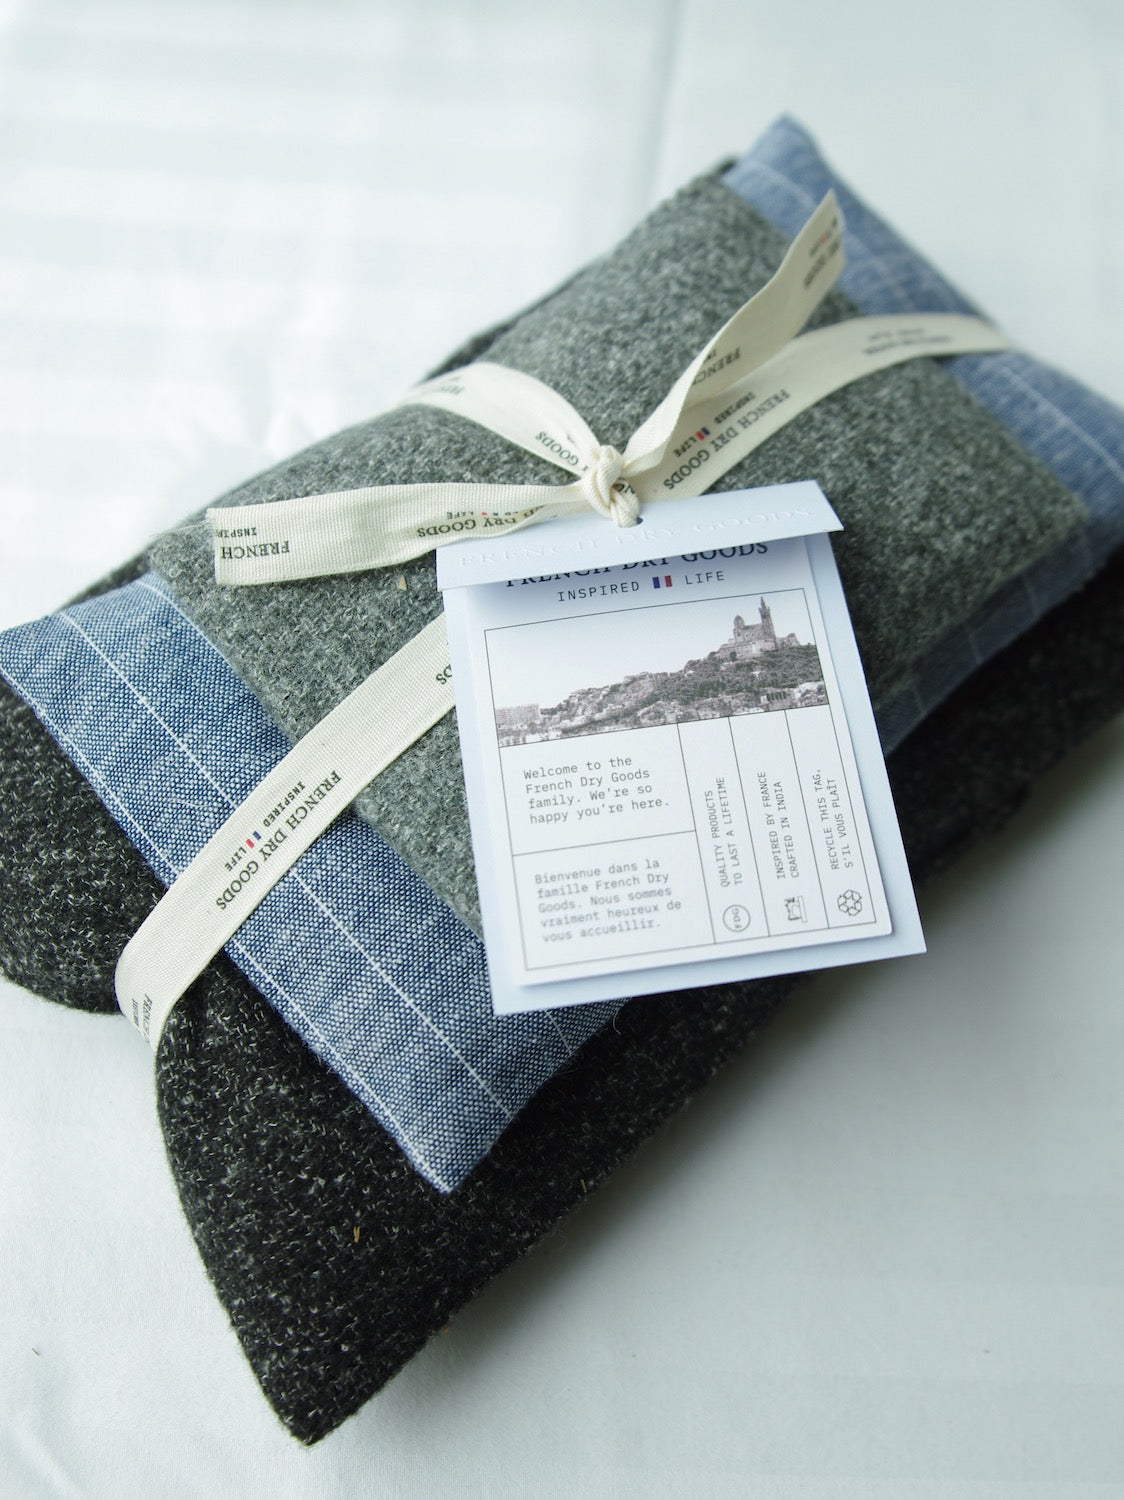 French Dry Goods Lavender Sachet Pouch - Grey Wool French Dry Goods Brand_French Dry Goods Home_Decor Home_French Nostalgia Home_Gifts Home_Provençal Style New Arrivals new arrivals 2023 lavender-sachet-linen-pouches-french-dry-goods_D6E90C50_1124x1500_6921e44d-13a4-4a57-8bcf-26f31d3a0fd8